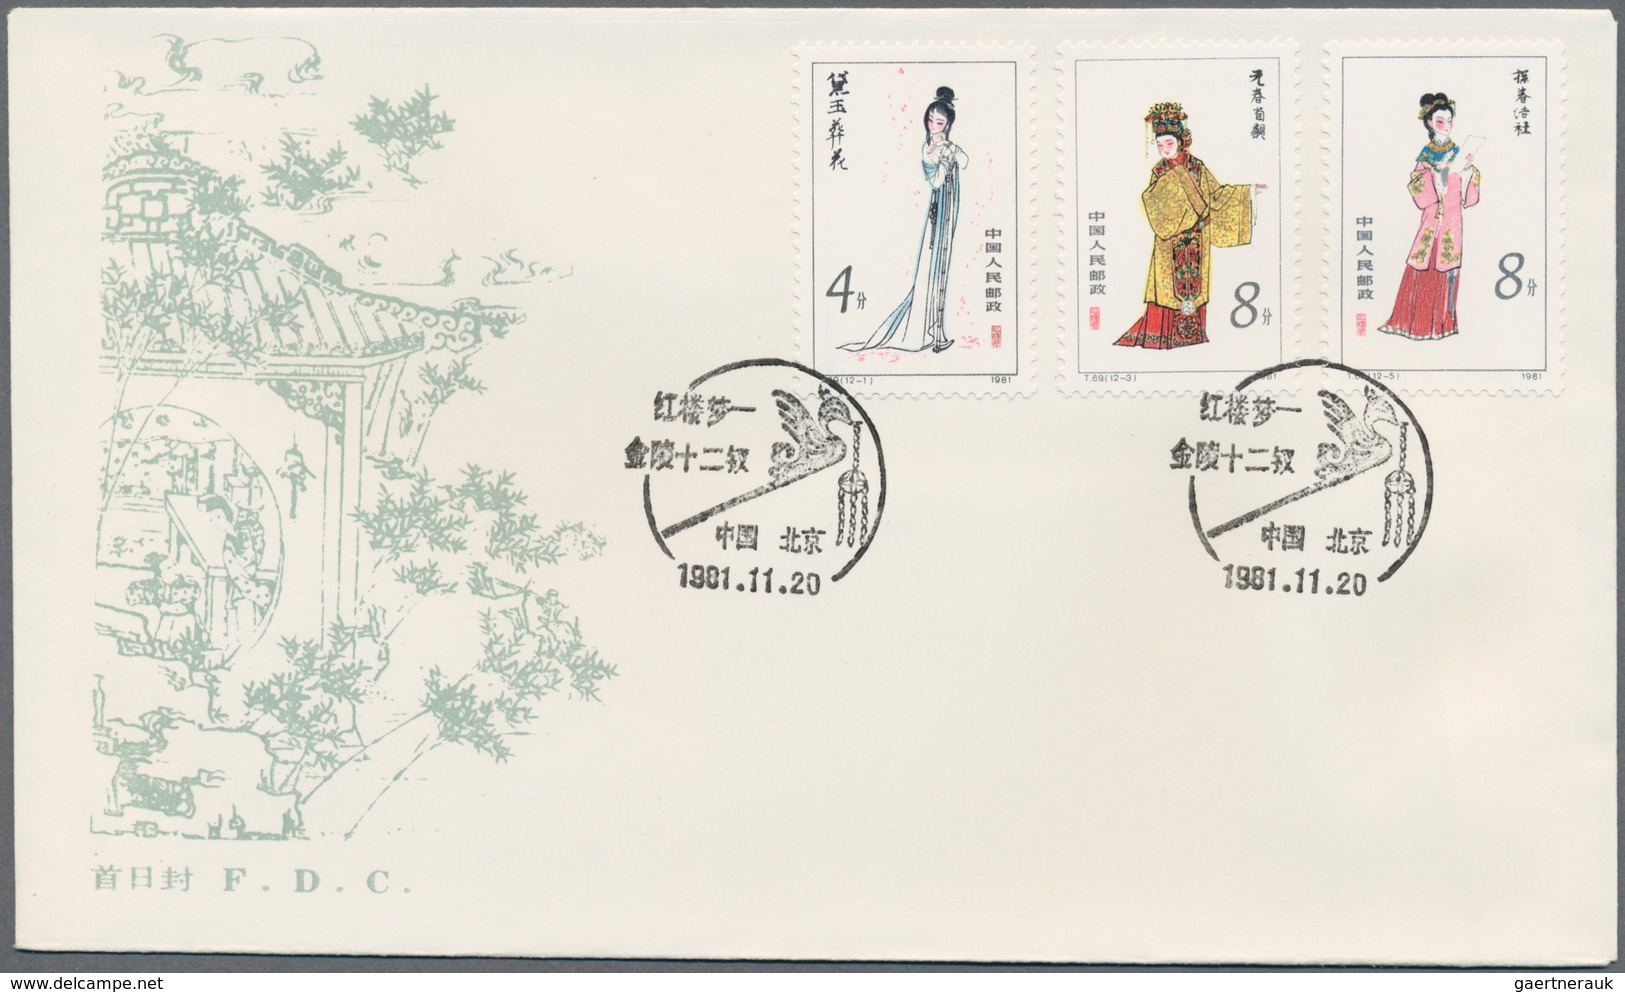 China - Volksrepublik: 1979/89, largely complete collection of FDCs, bearing many better sets includ